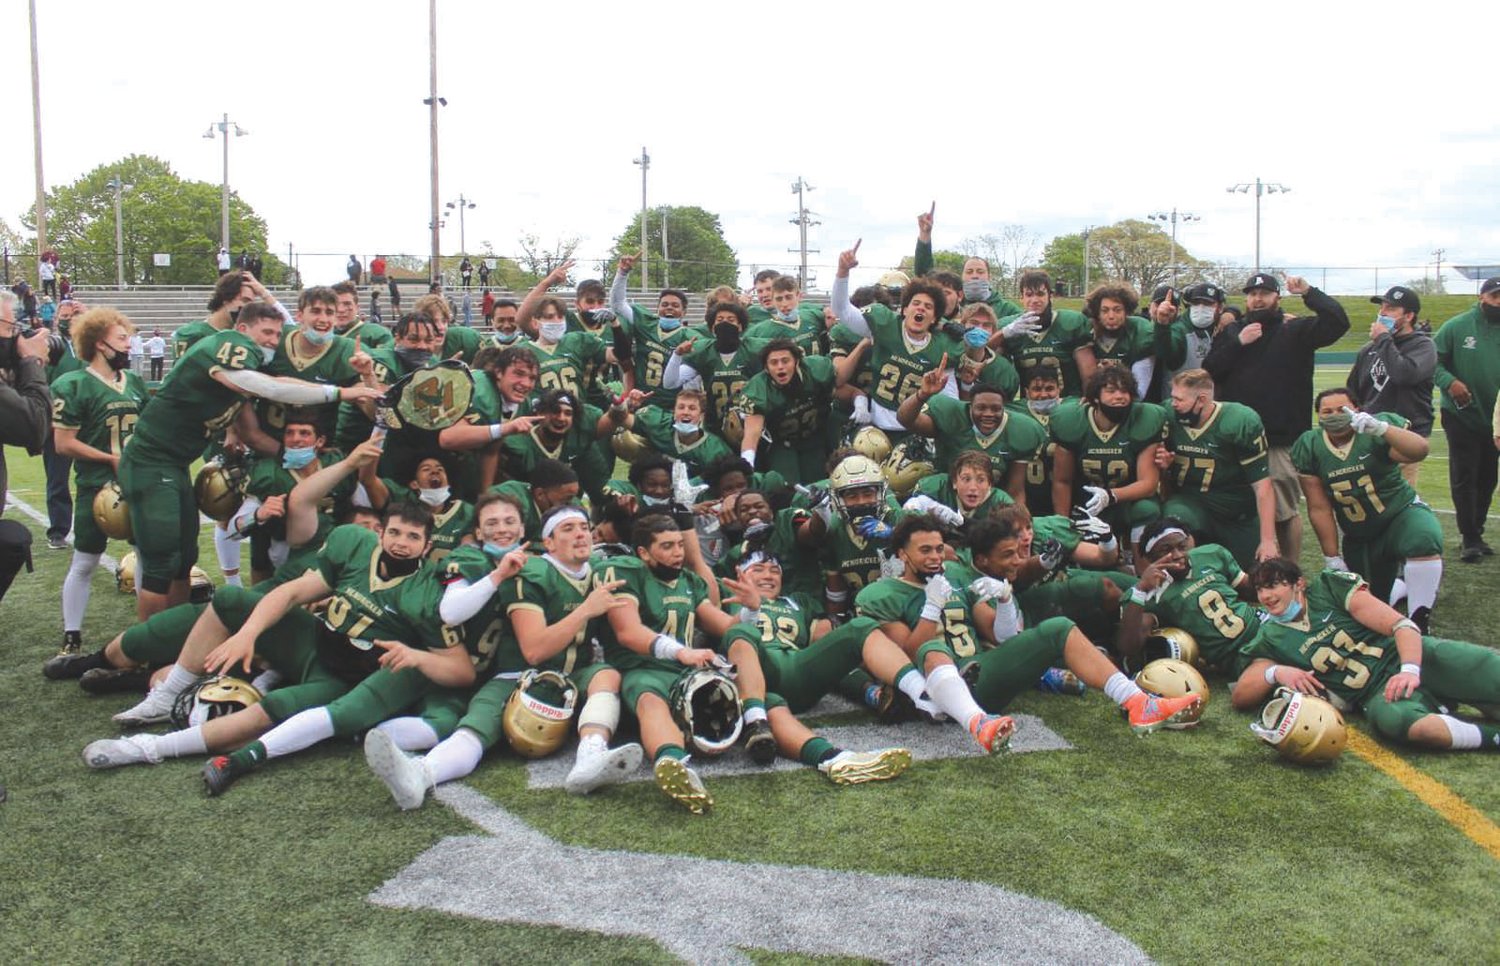 STATE CHAMPS: The Hendricken football team after winning the state championship.